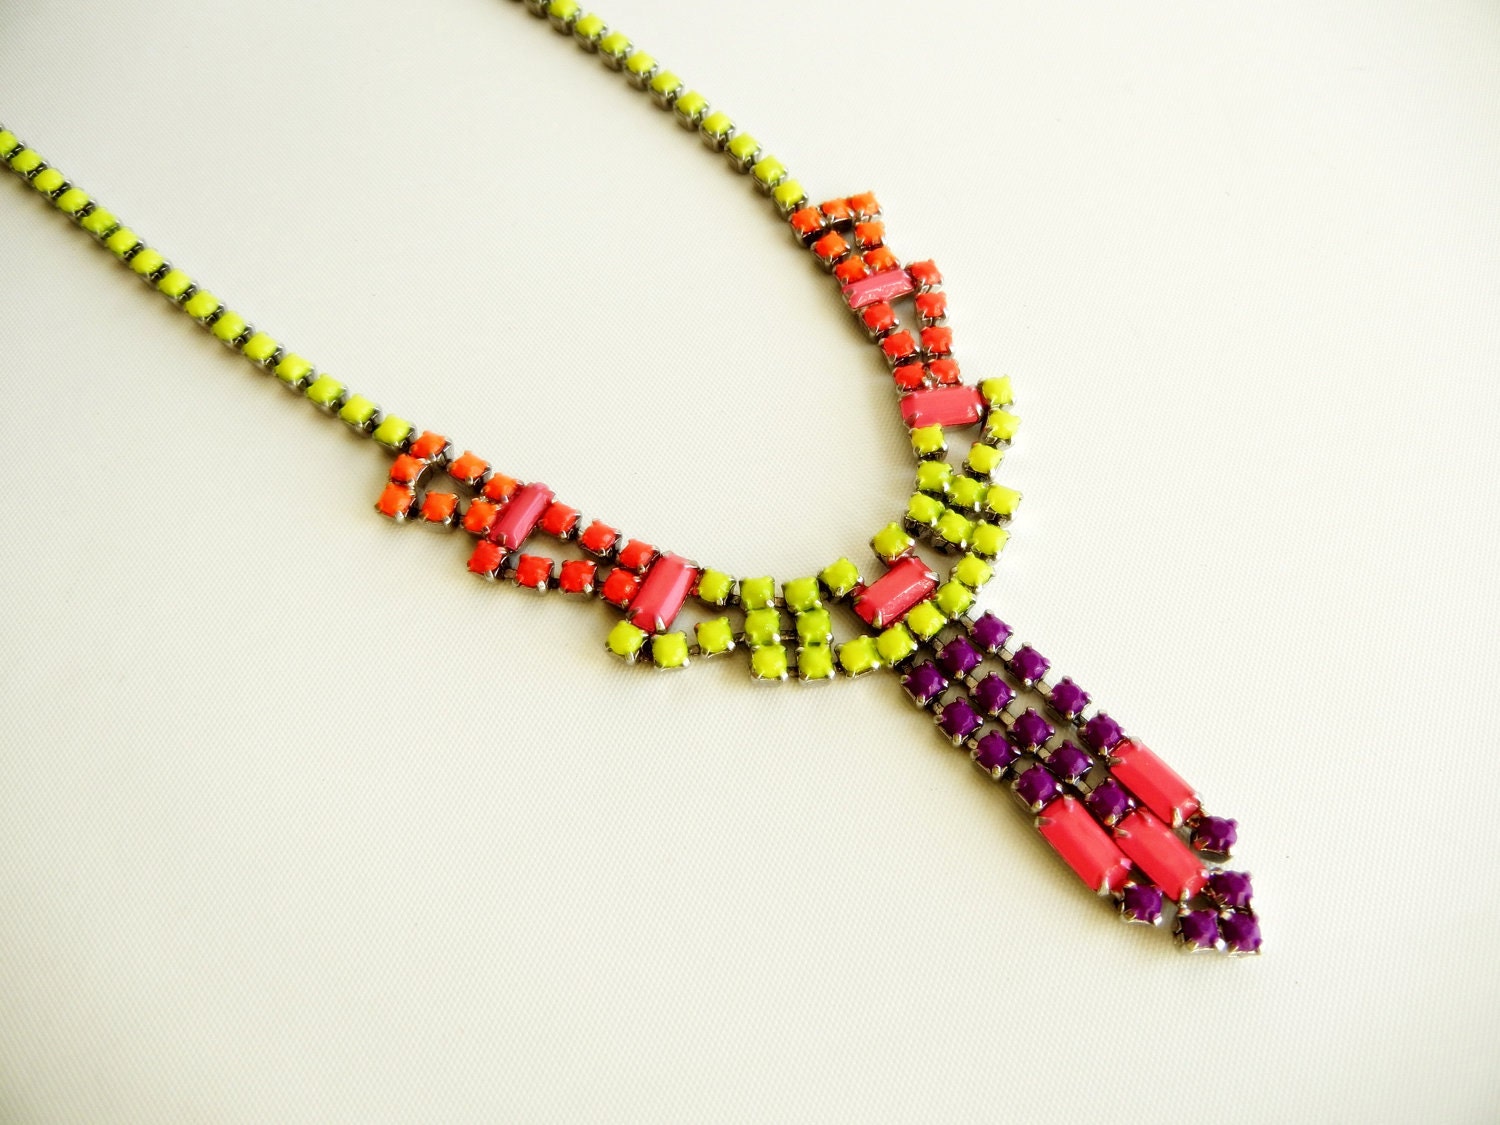 Vintage 1950s One Of A Kind Hand Painted Neon Rhinestone Necklace